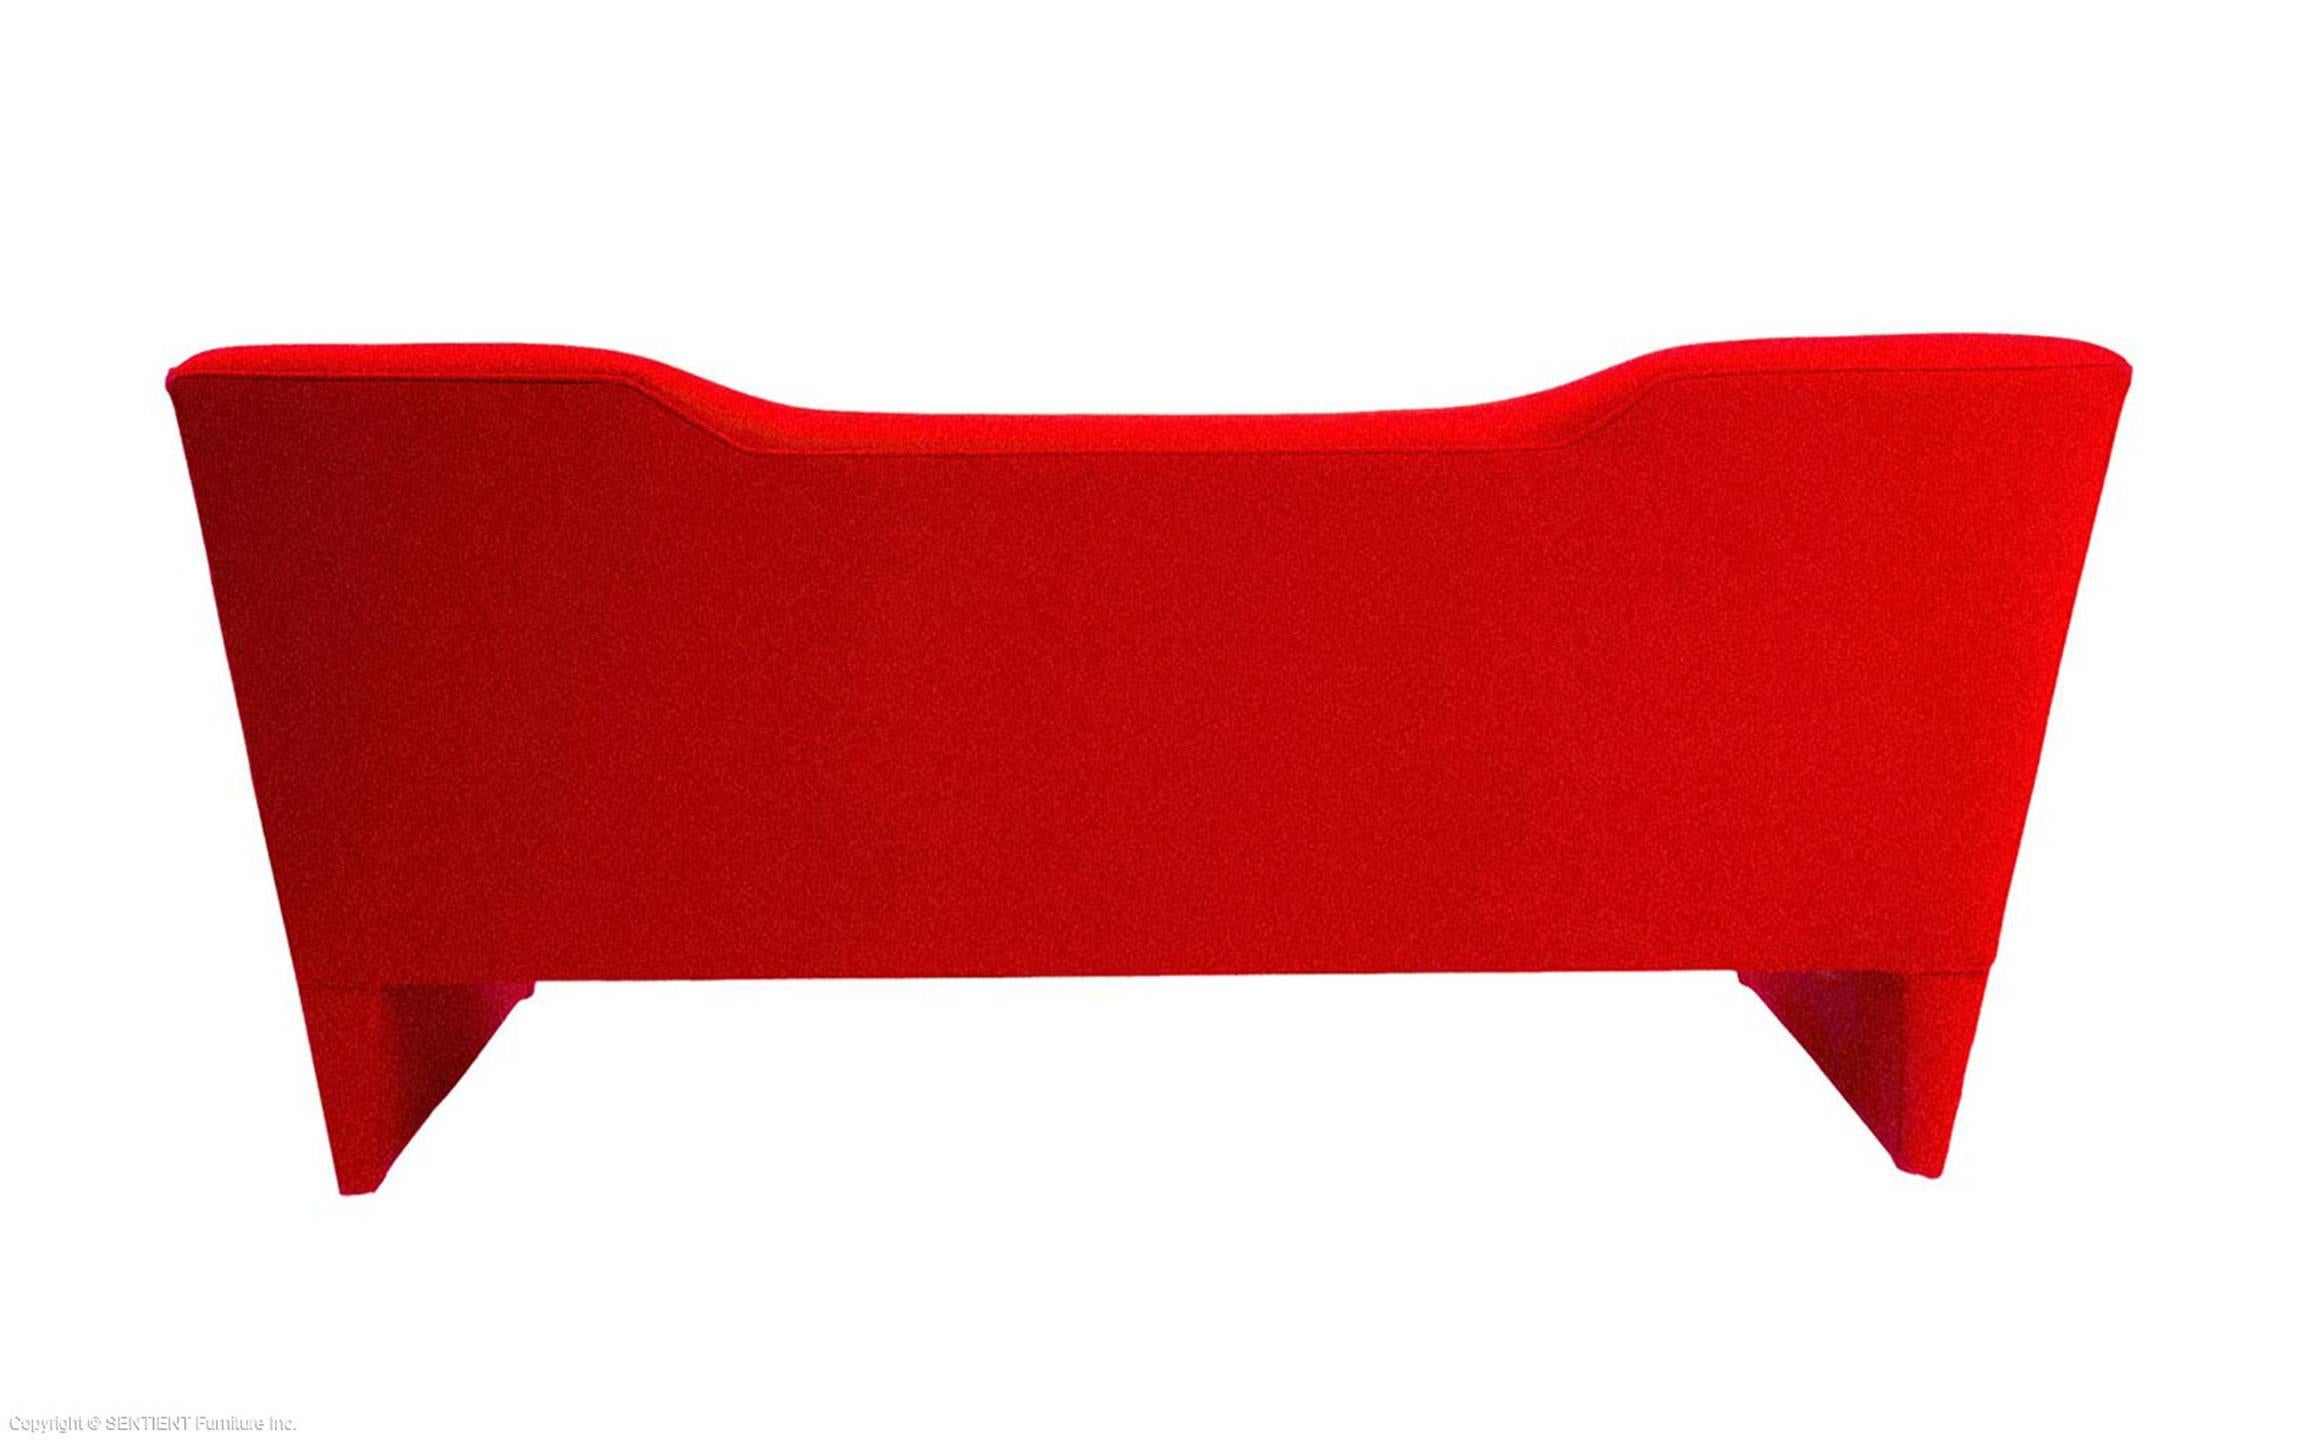 Dyed Sentient Memphis Inspired Nersi Sofa For Sale